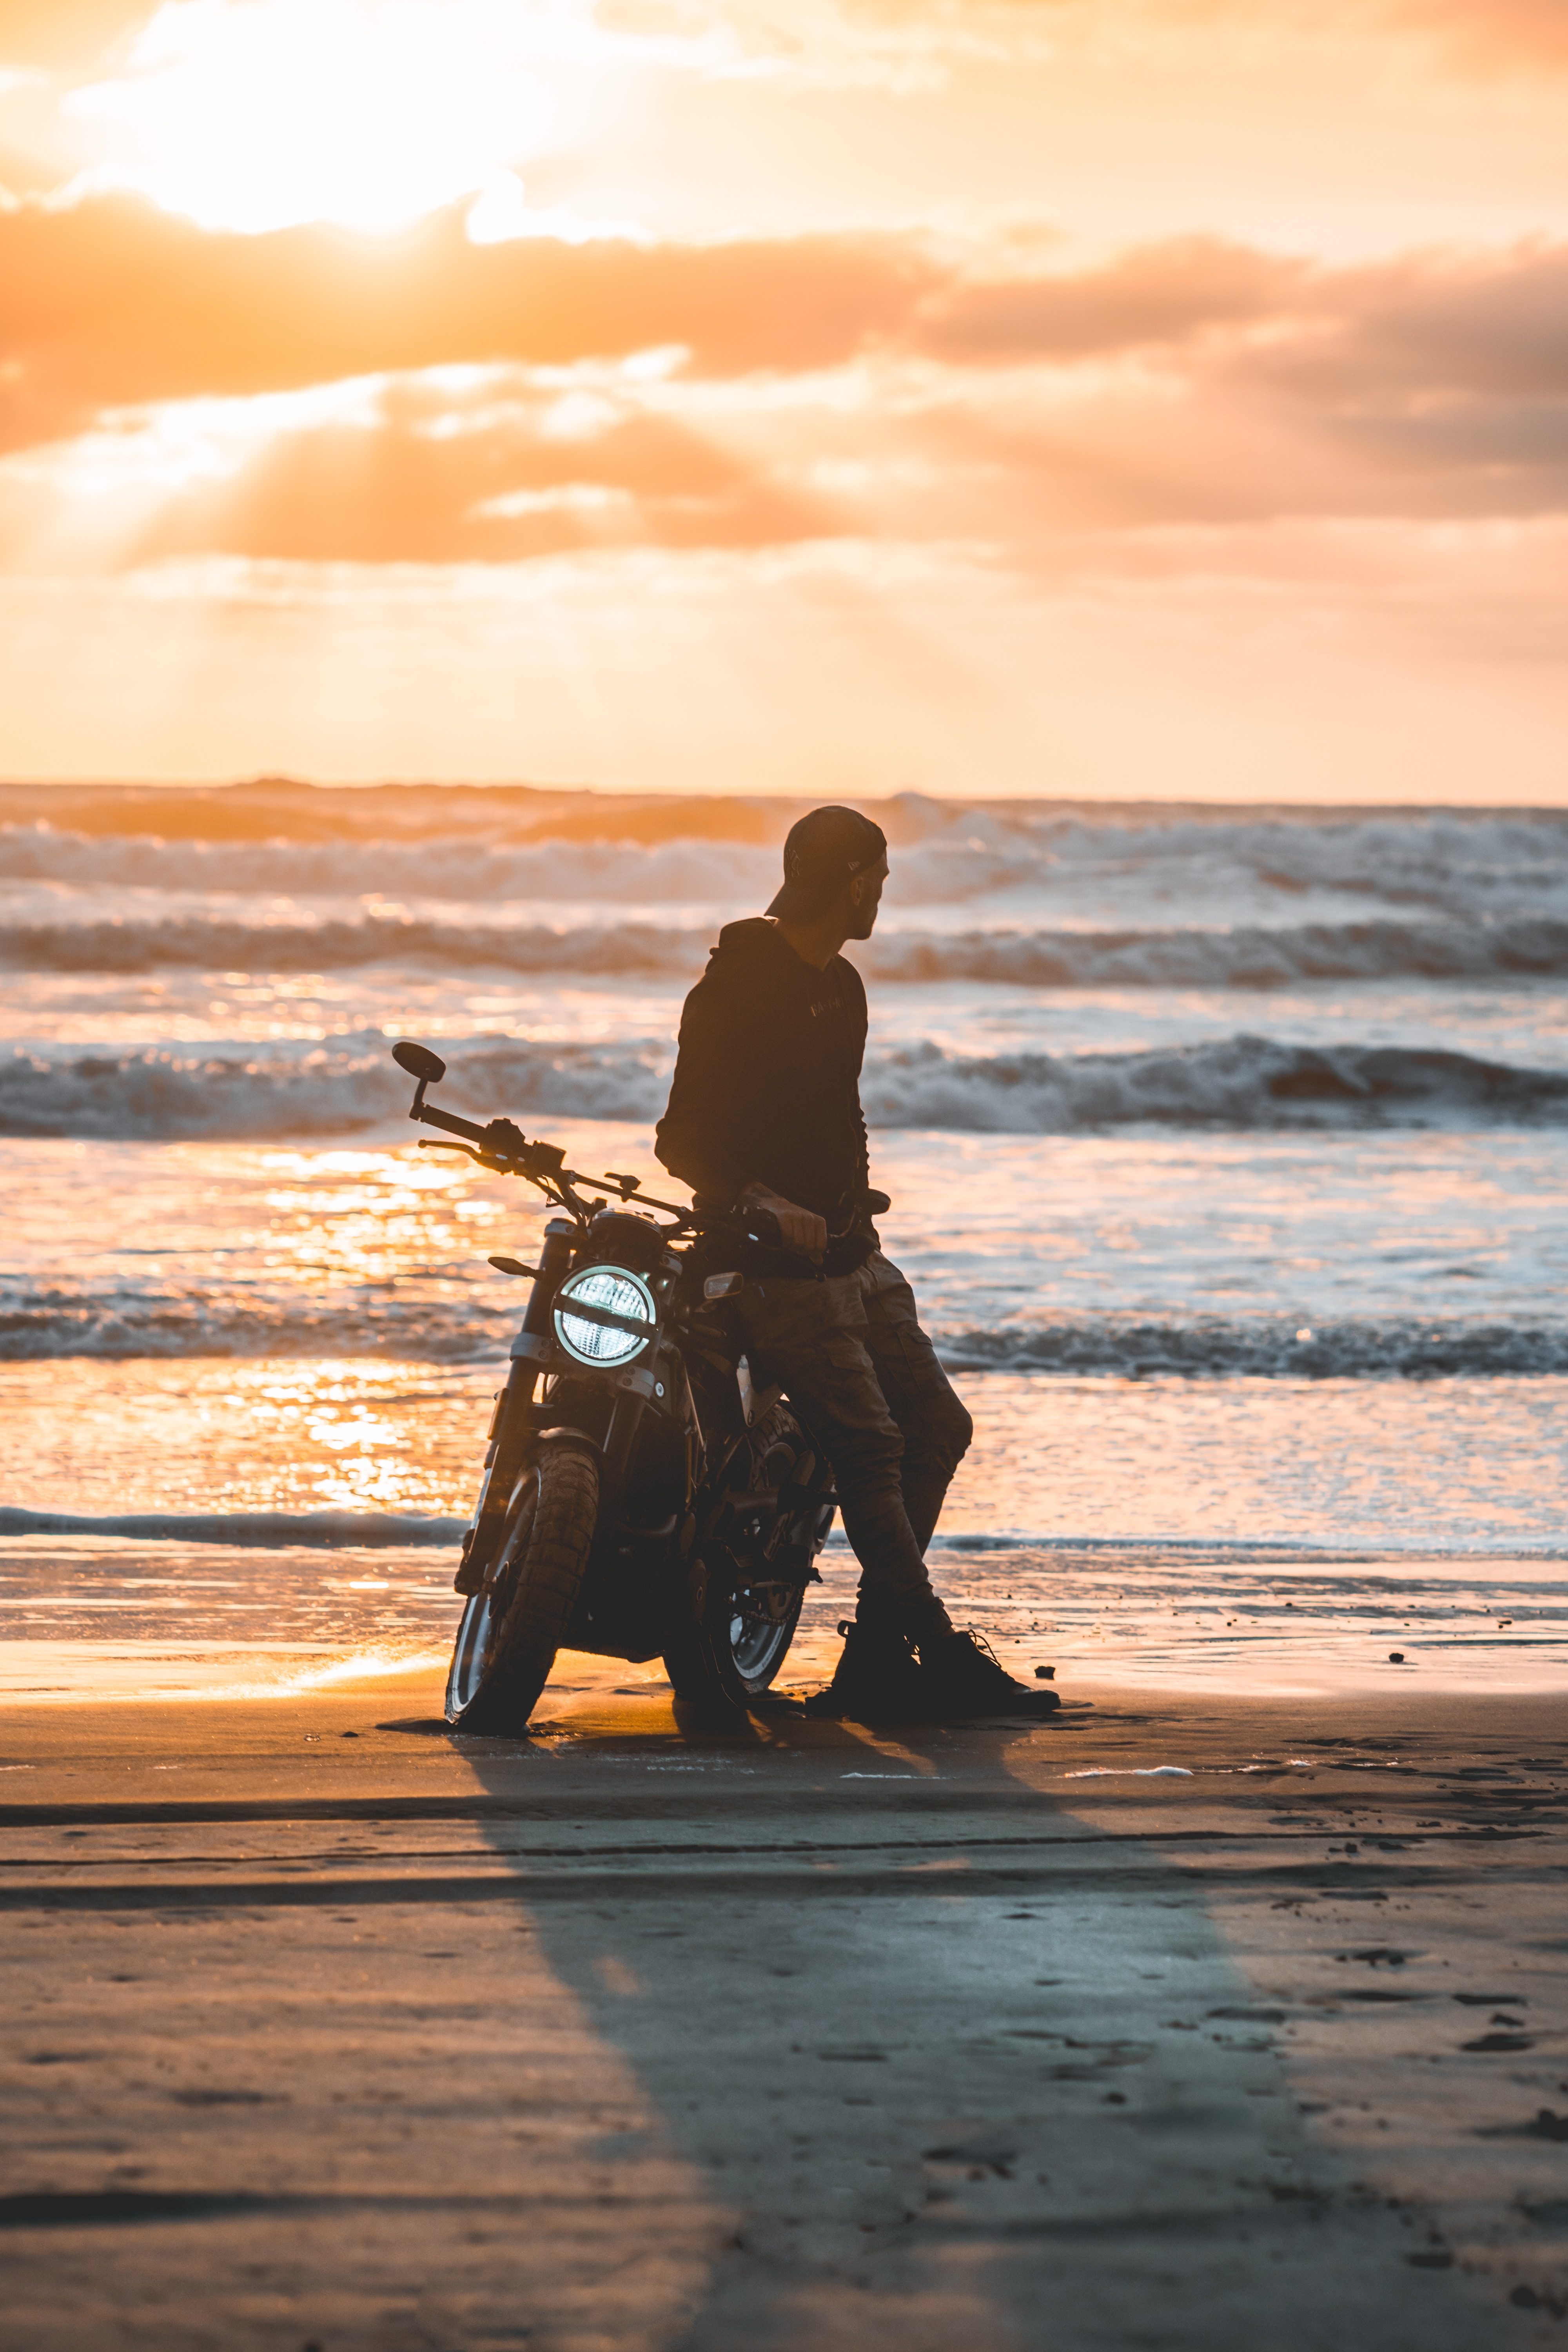 motorcyclist, motorcycles, motorcycle, loneliness, sunset, silhouette